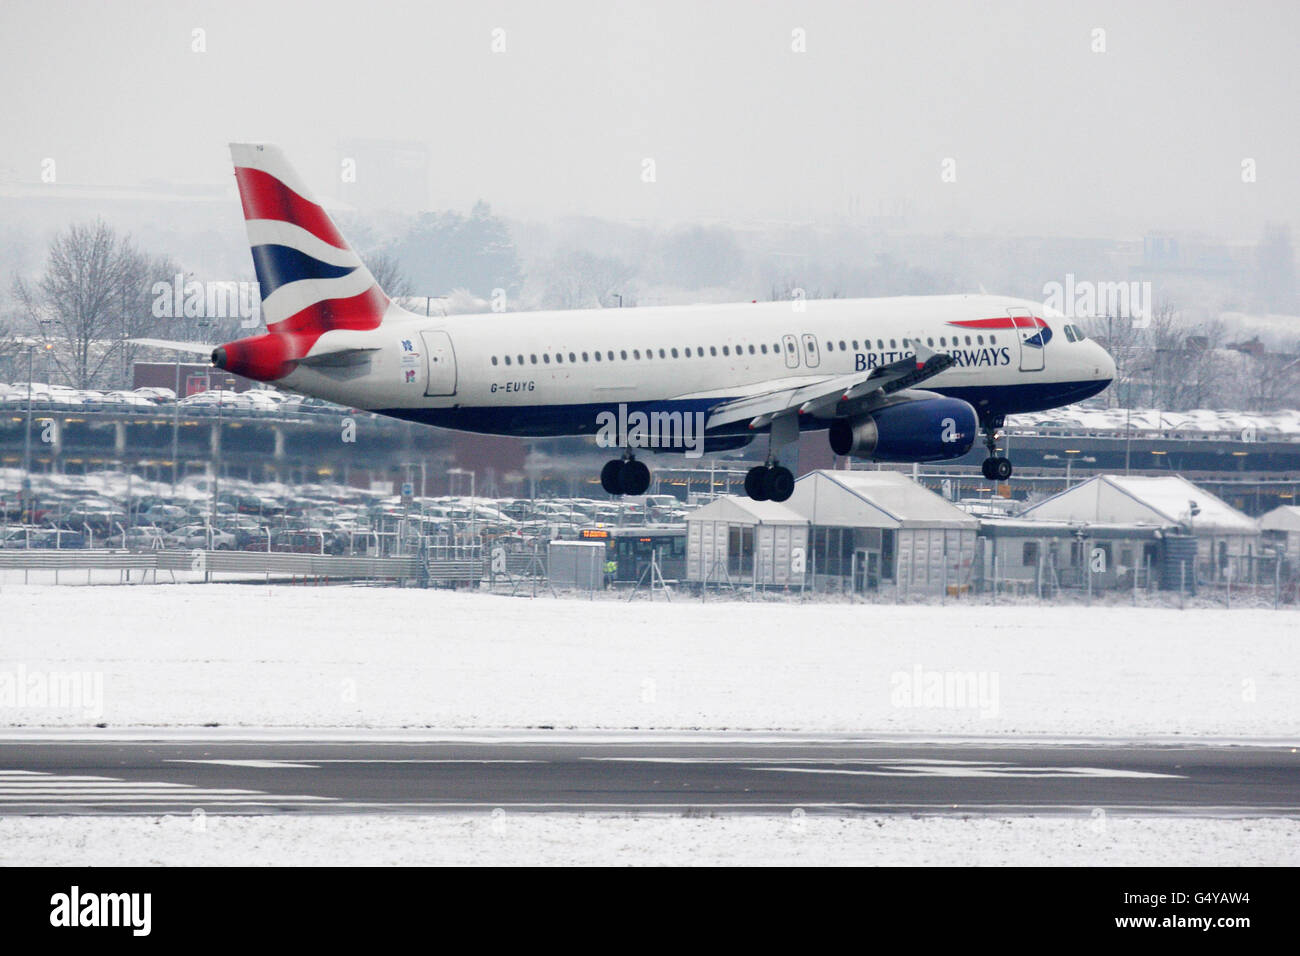 A British Airways plane takes off from Heathrow Airport in West London. Stock Photo